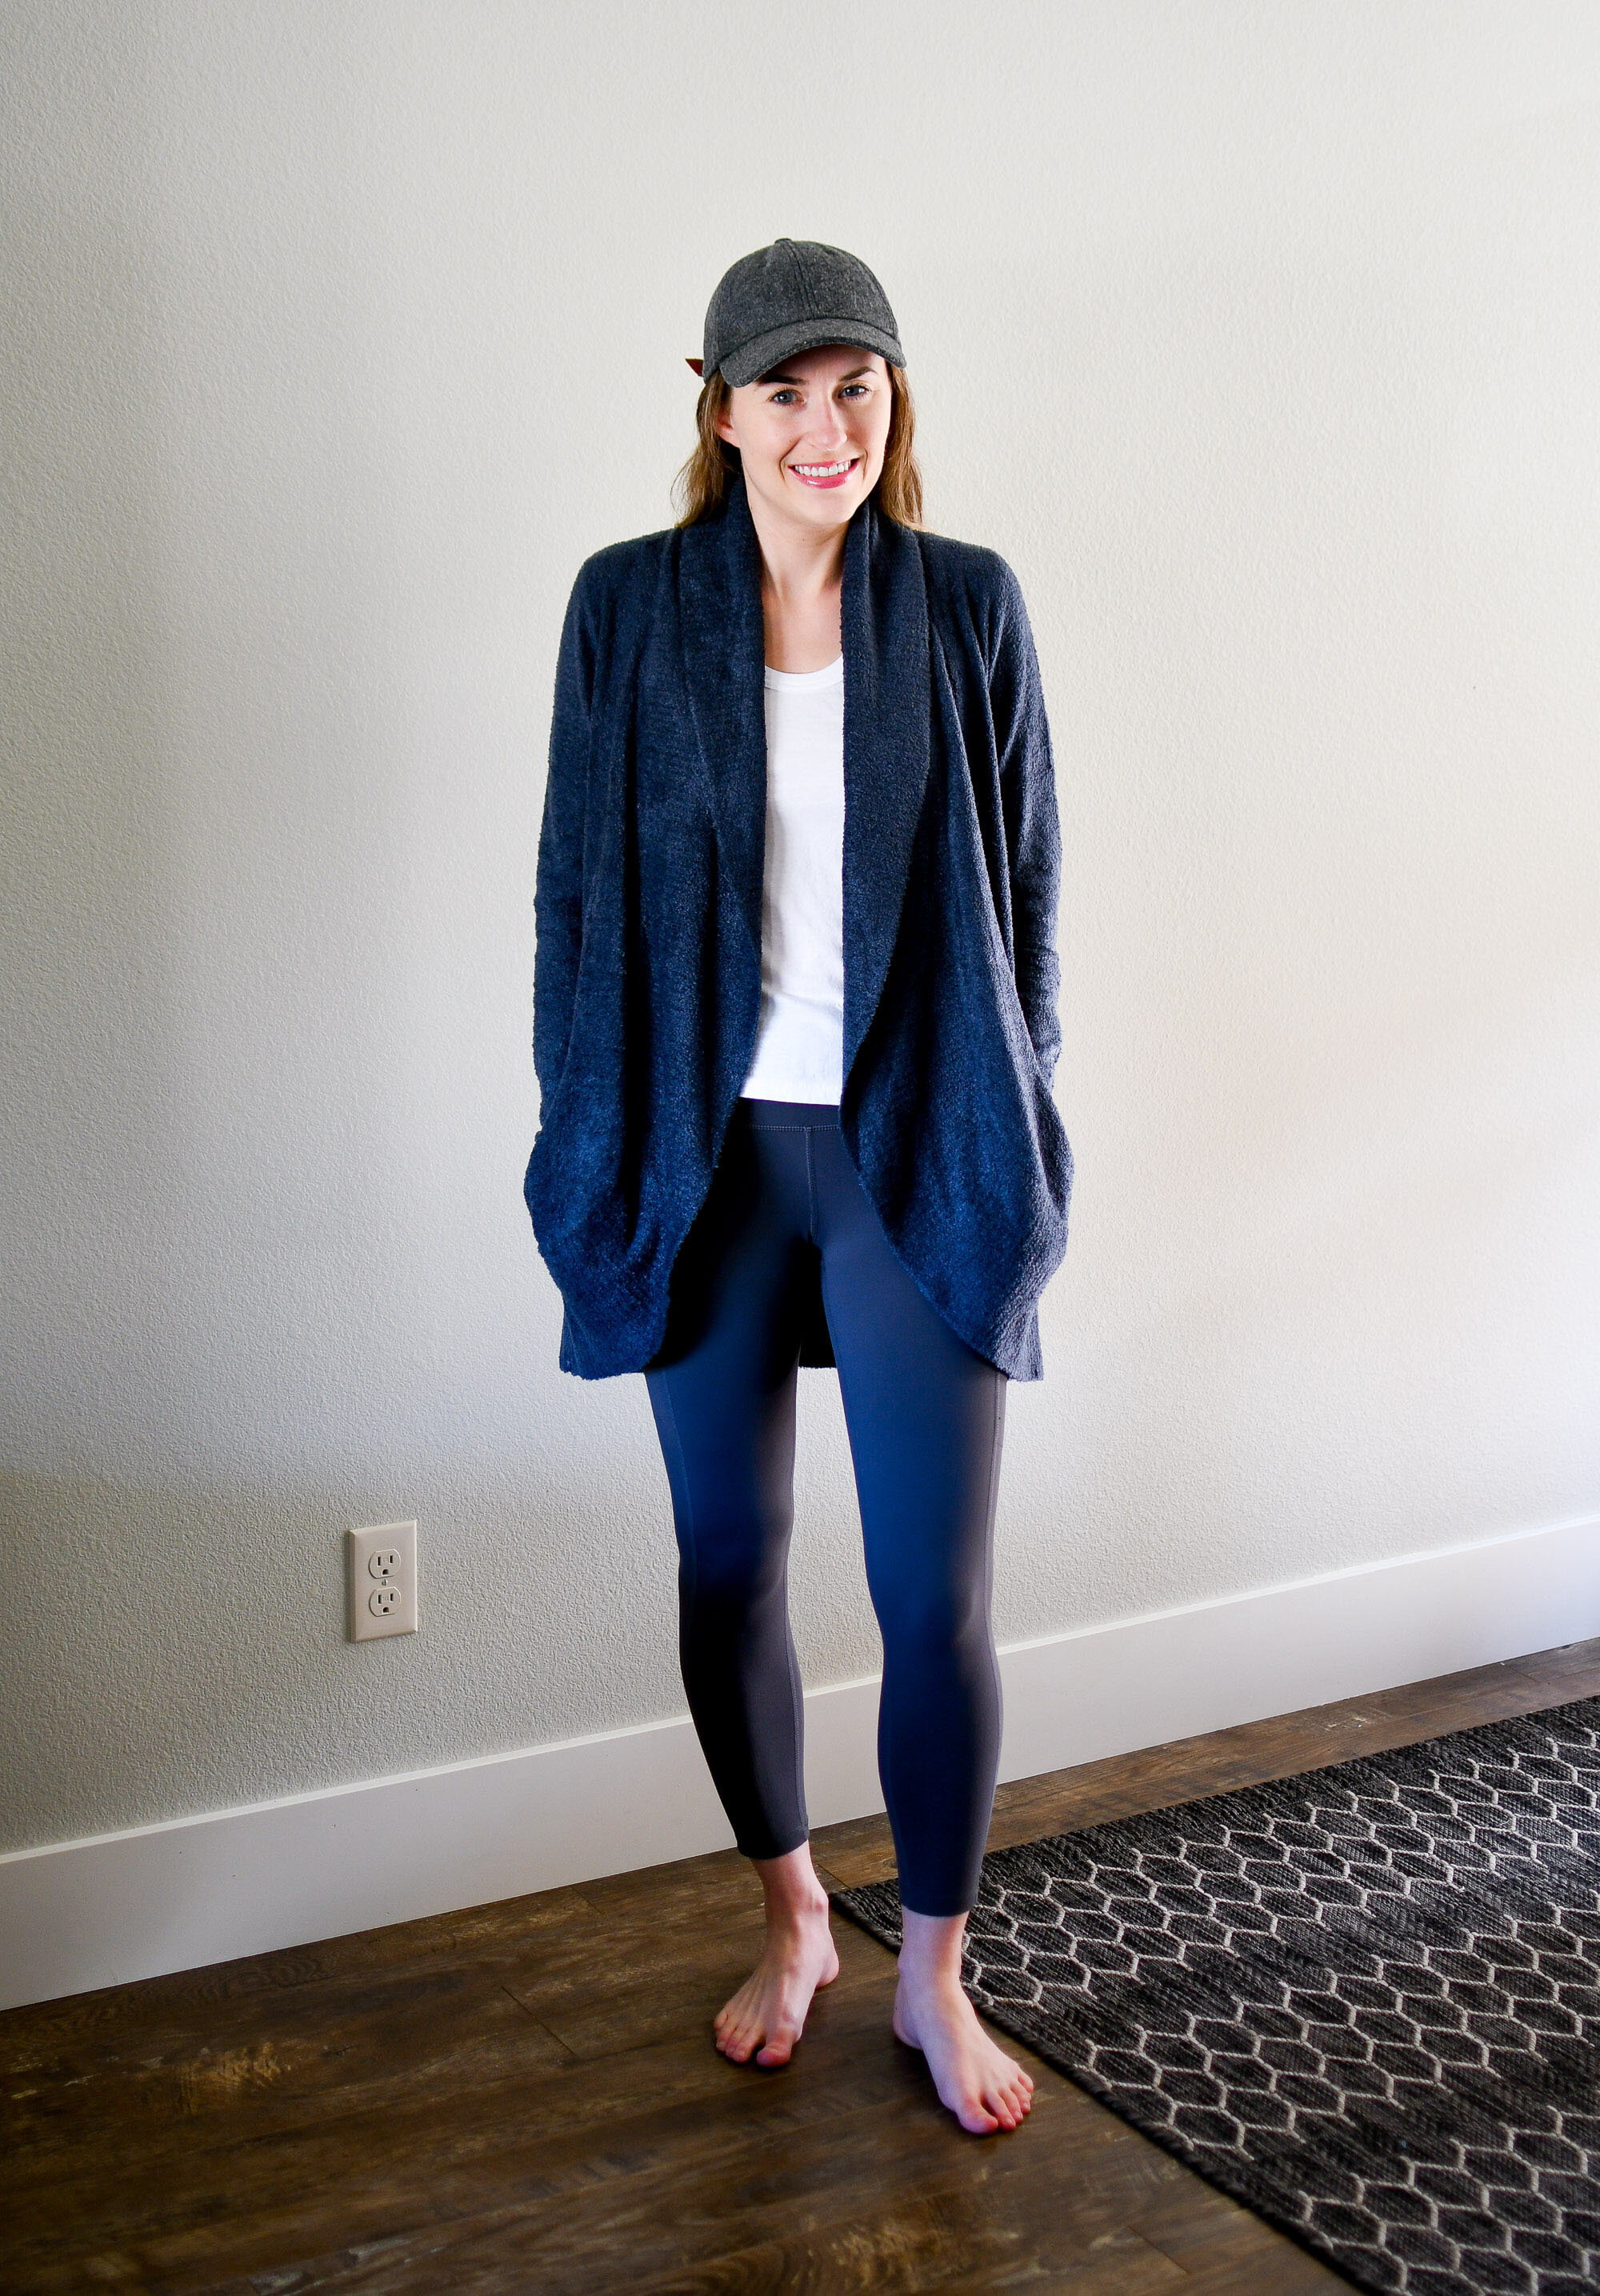 Work from home outfit with navy cardigan and grey leggings — Cotton Cashmere Cat Hair